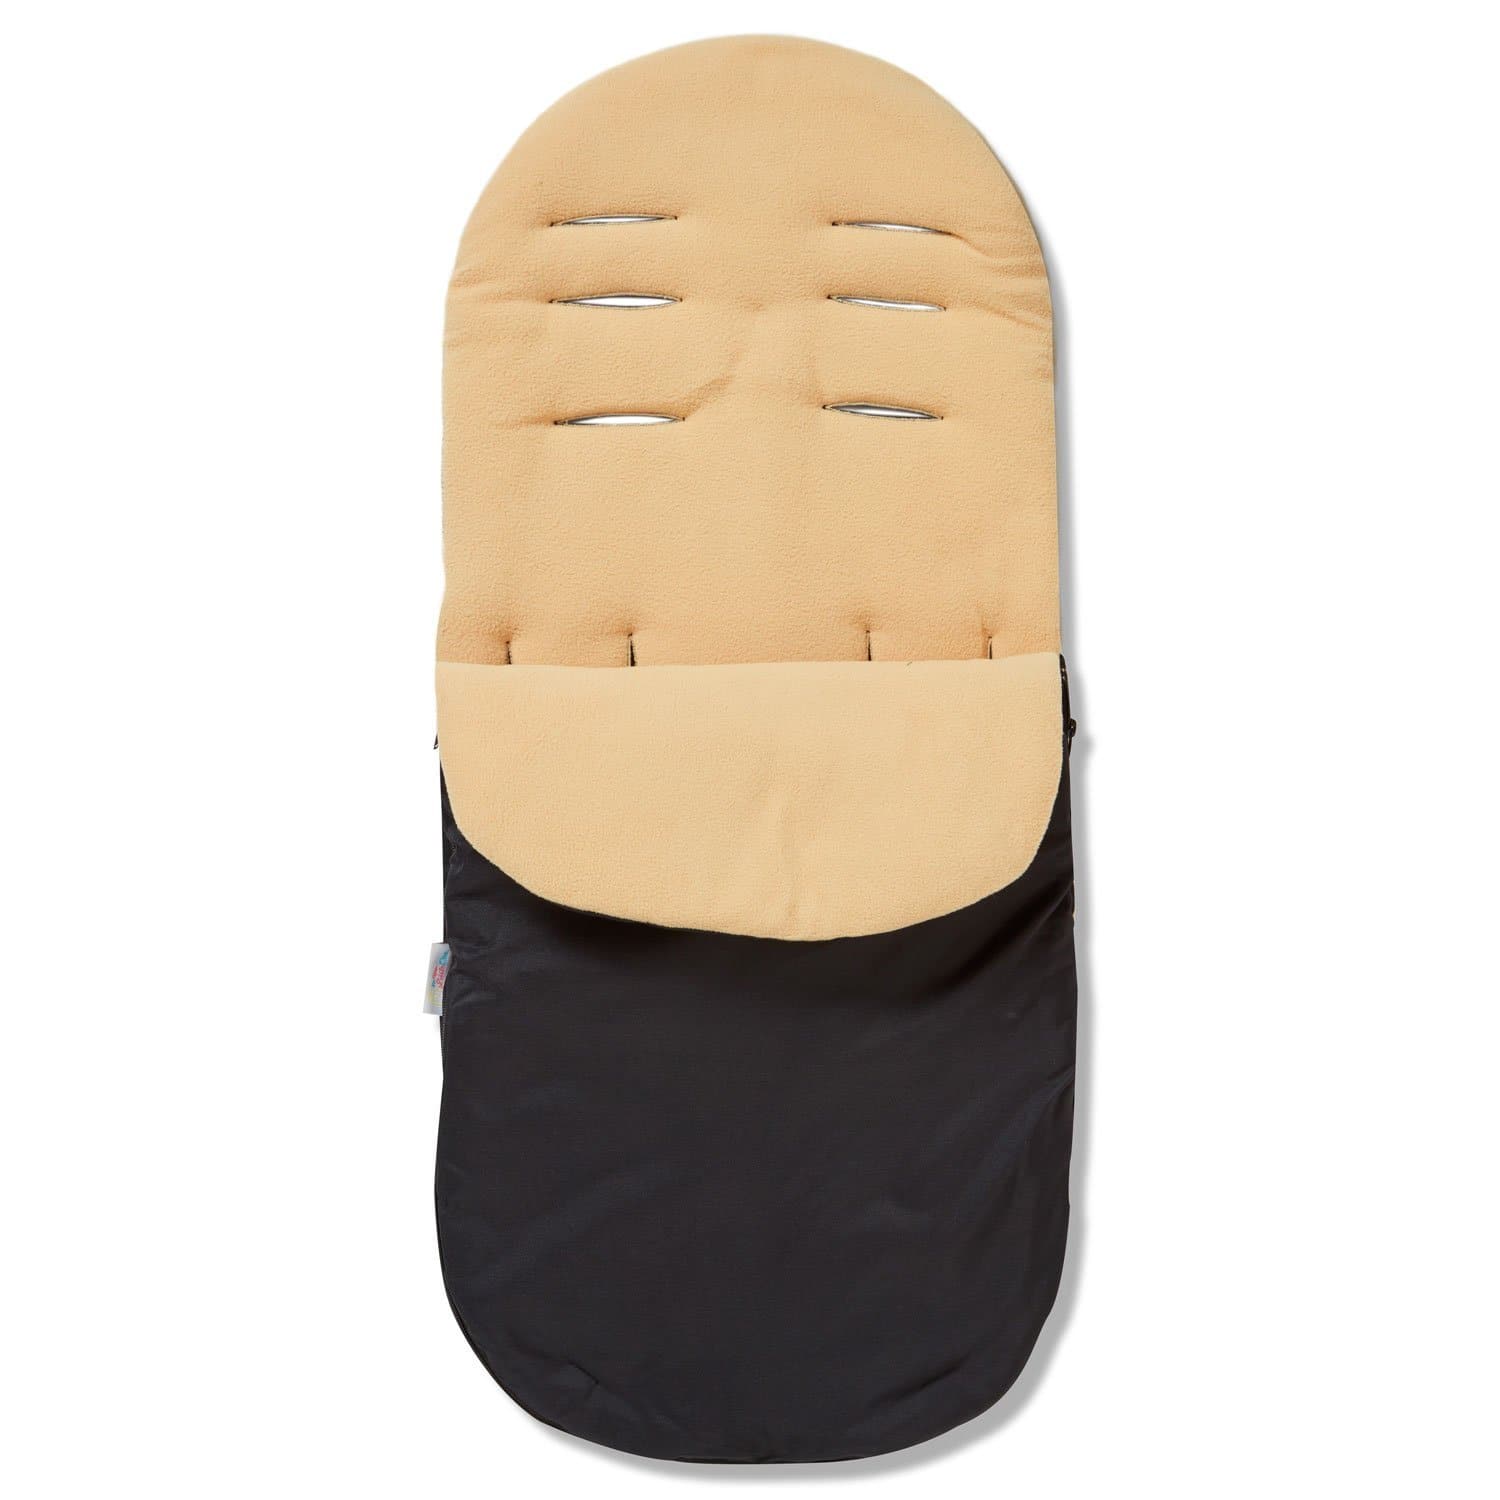 Footmuff / Cosy Toes Compatible with Cosatto - Sand / Fits All Models | For Your Little One